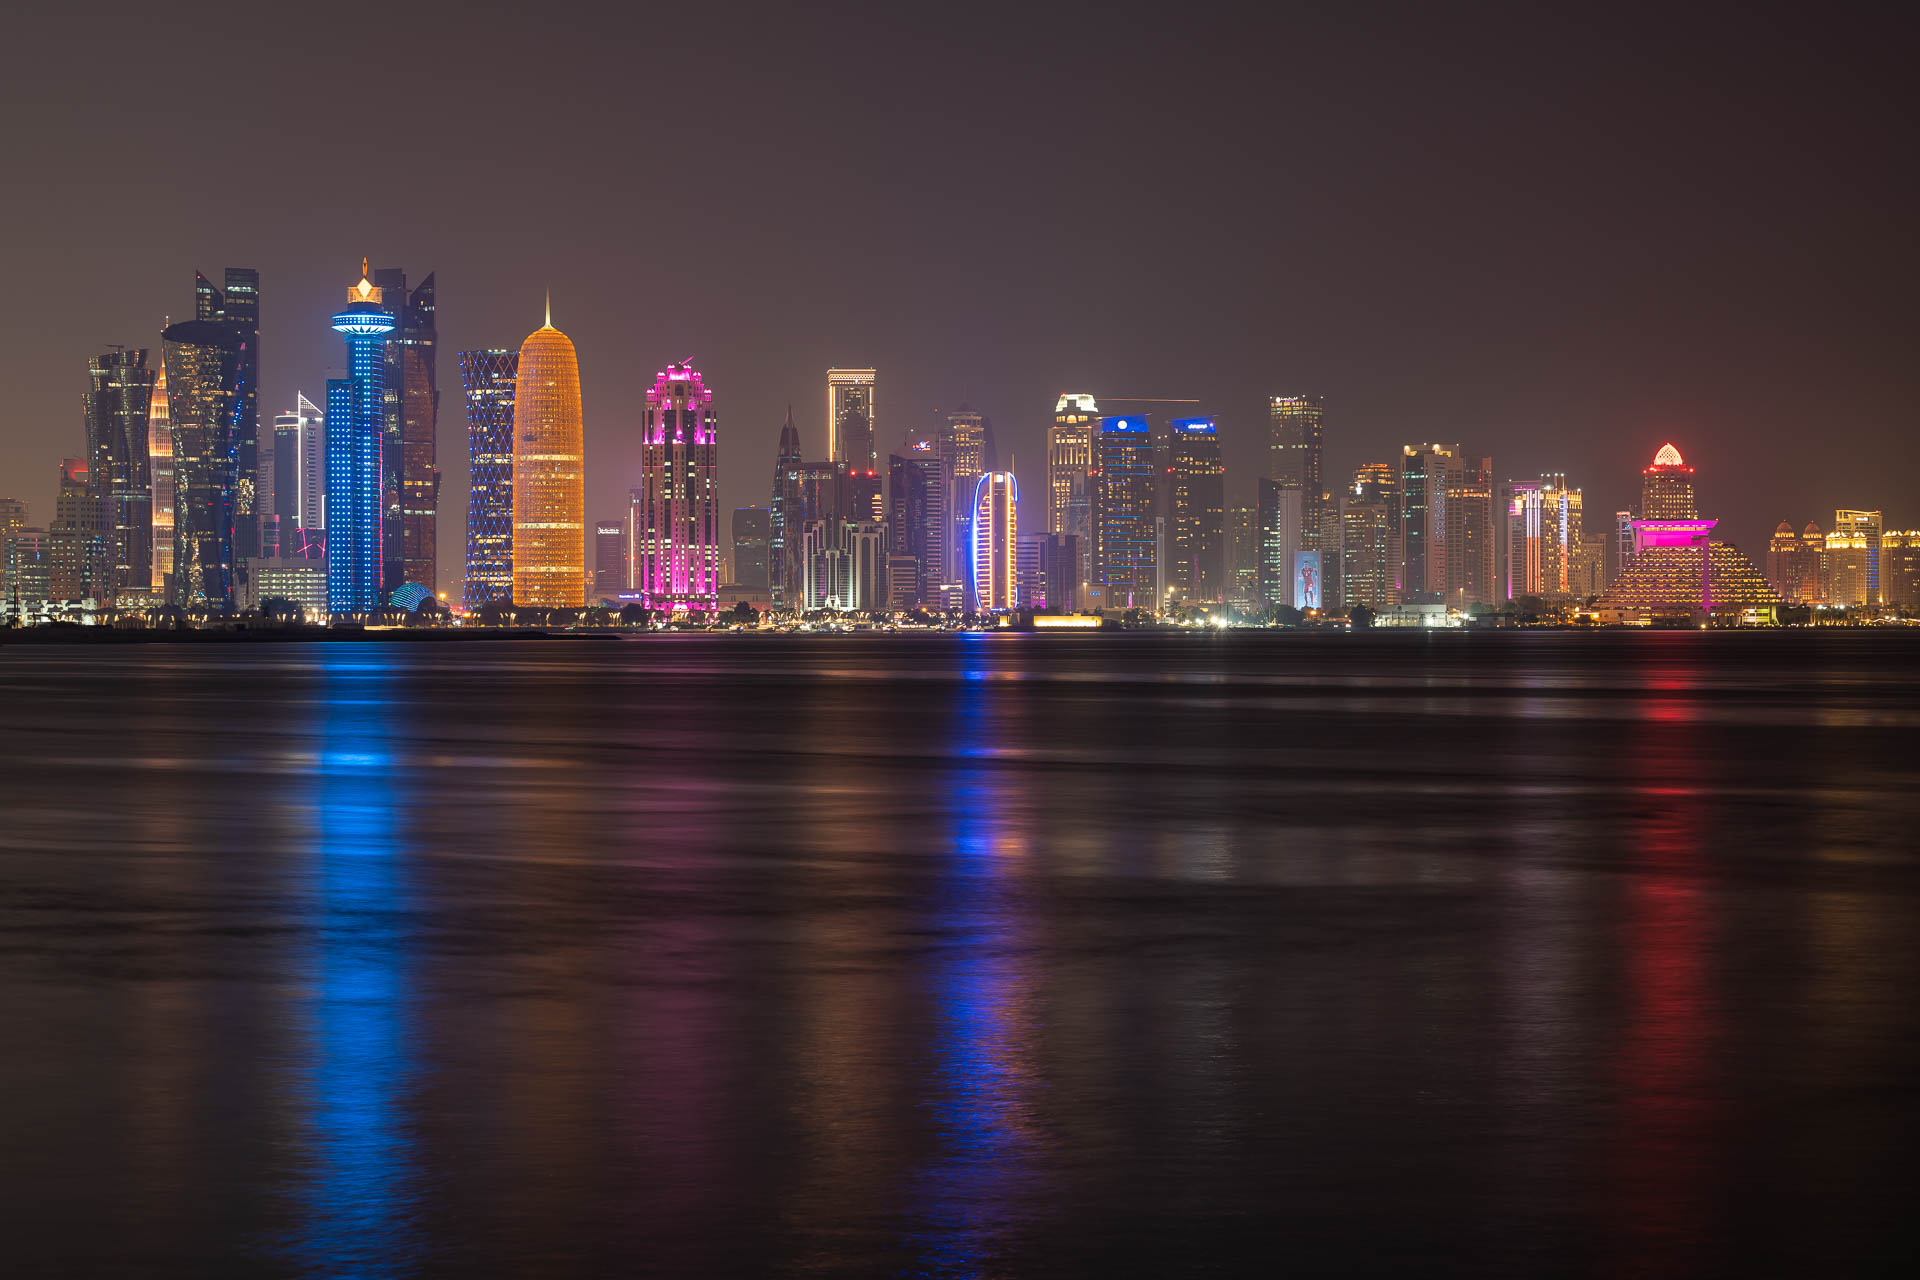 An overview of the city and large buildings of Central Doha at night